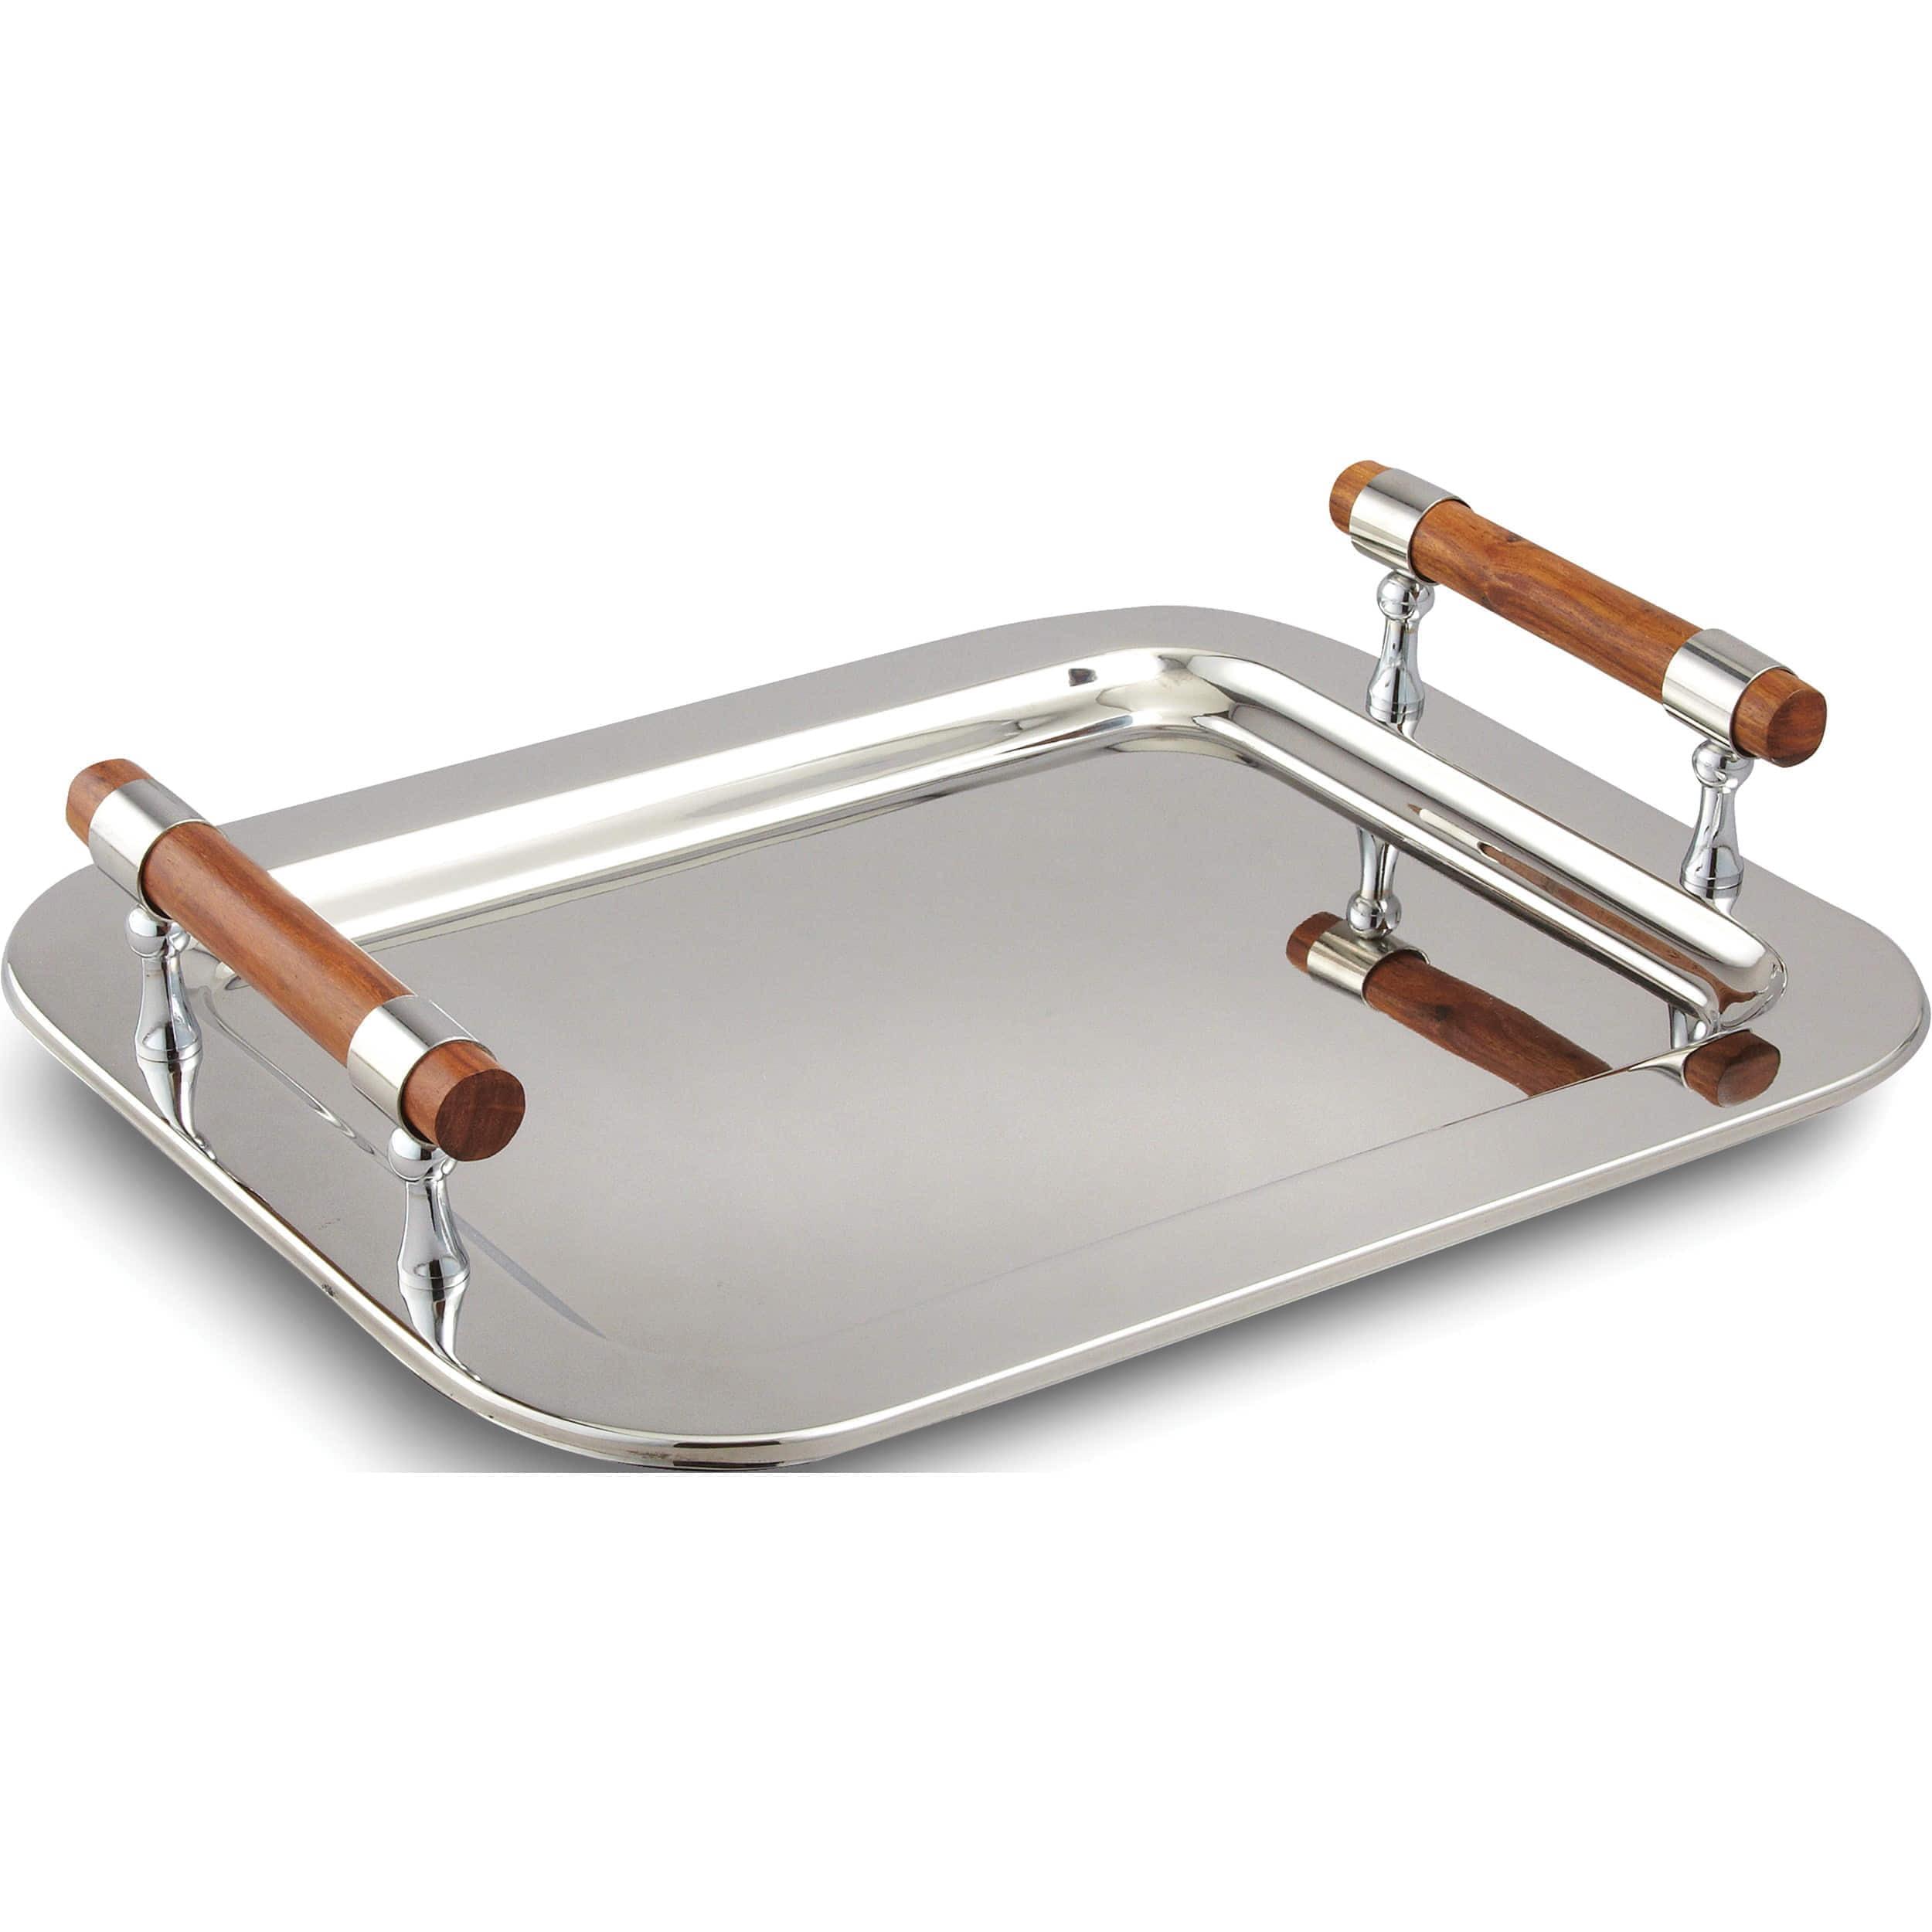 Elegant Modern Stainless Steel Serving Tray with Wooden Handles, 16.5" x 13"